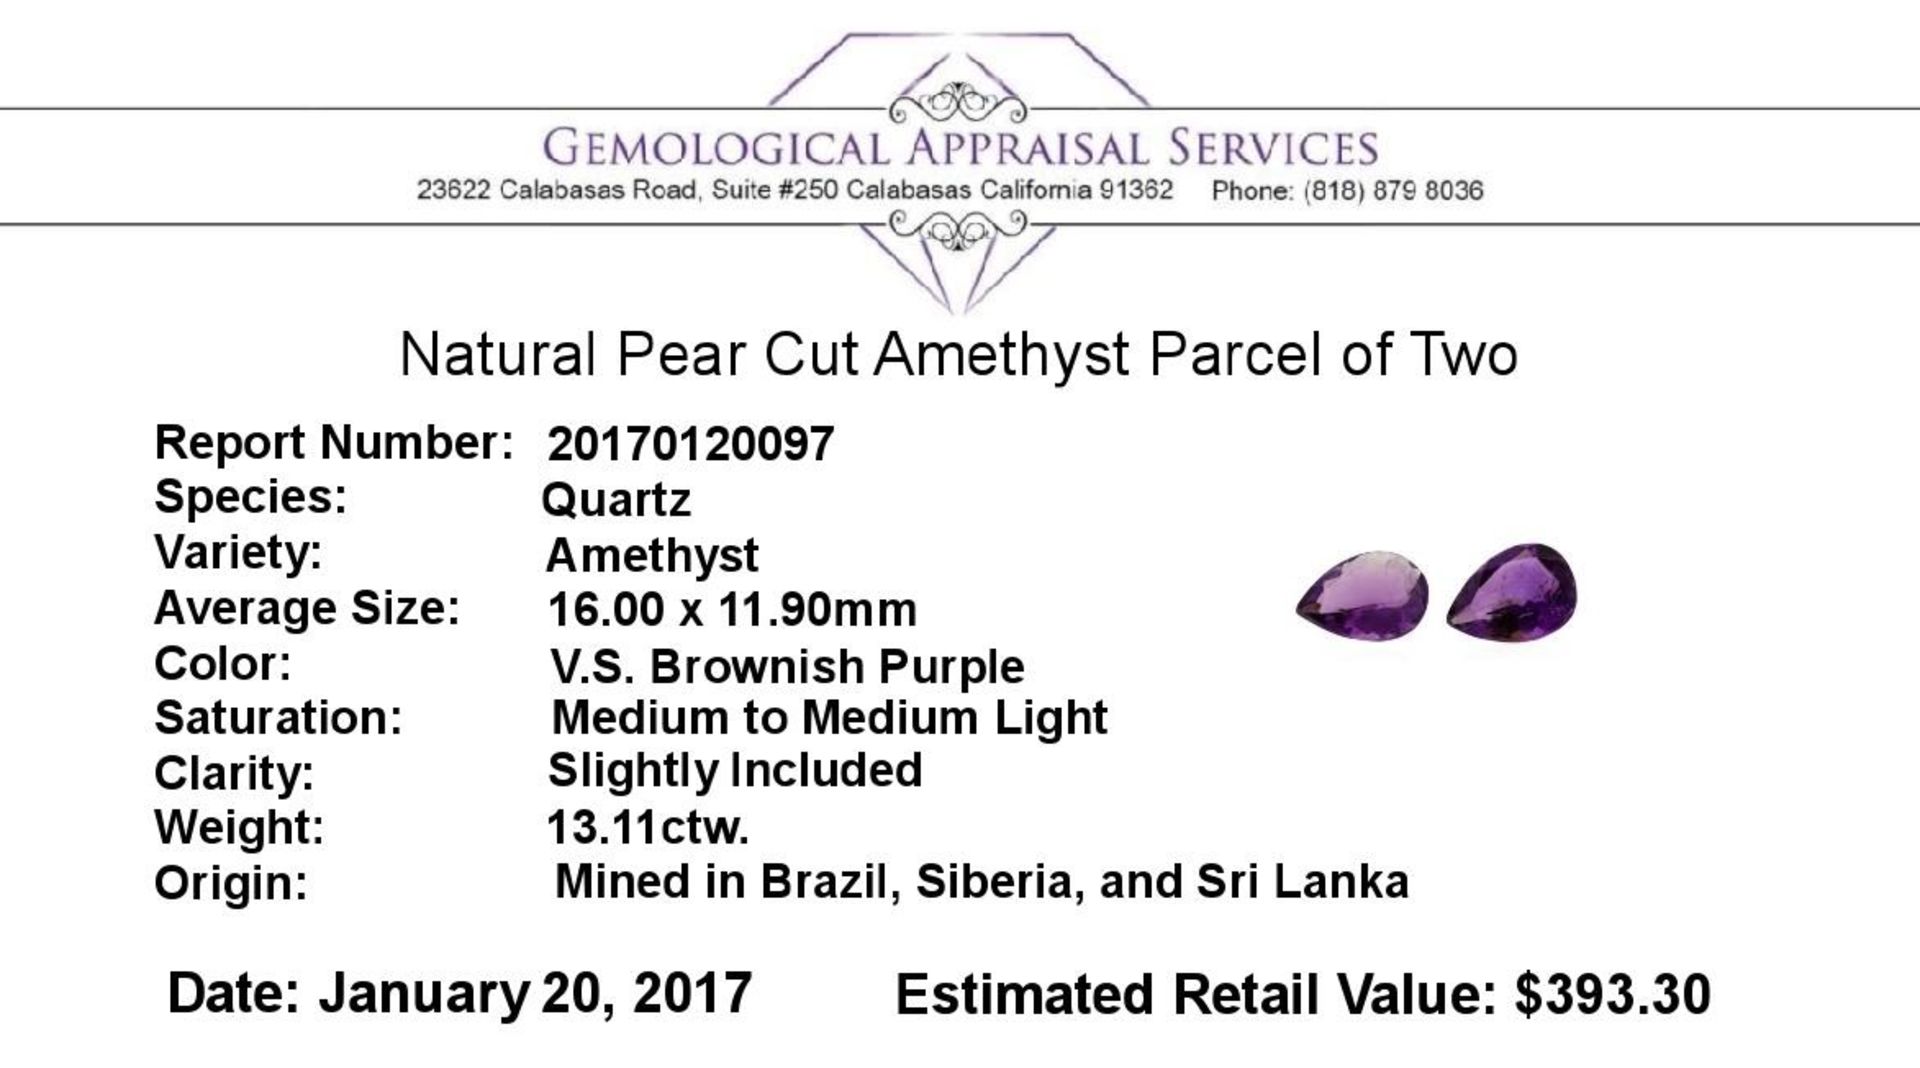 13.11 ctw.Natural Pear Cut Amethyst Parcel of Two - Image 3 of 3